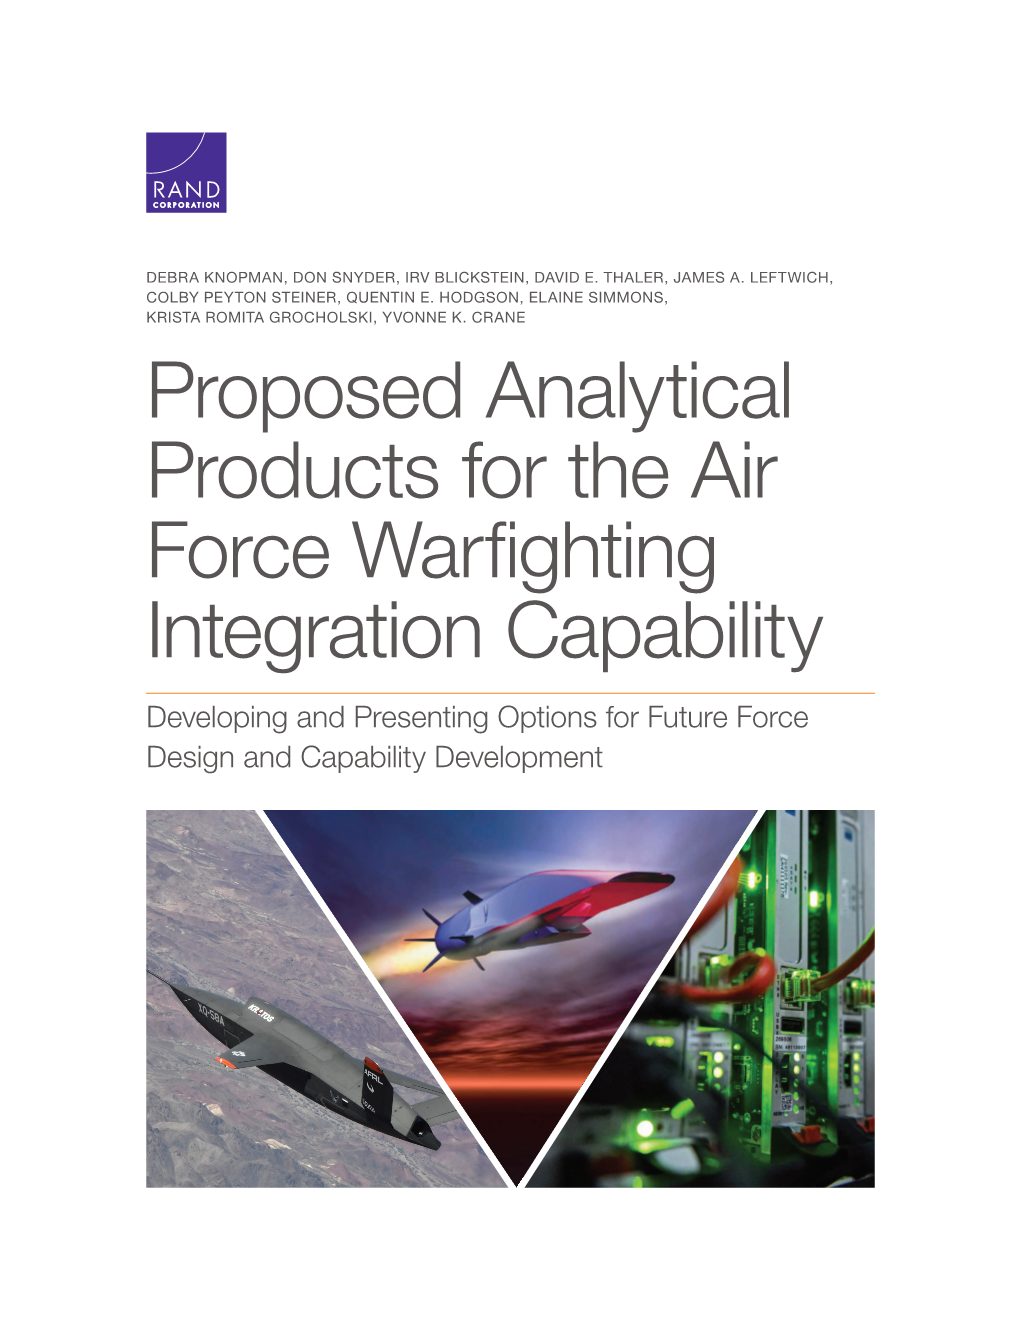 Proposed Analytical Products for the Air Force Warfighting Integration